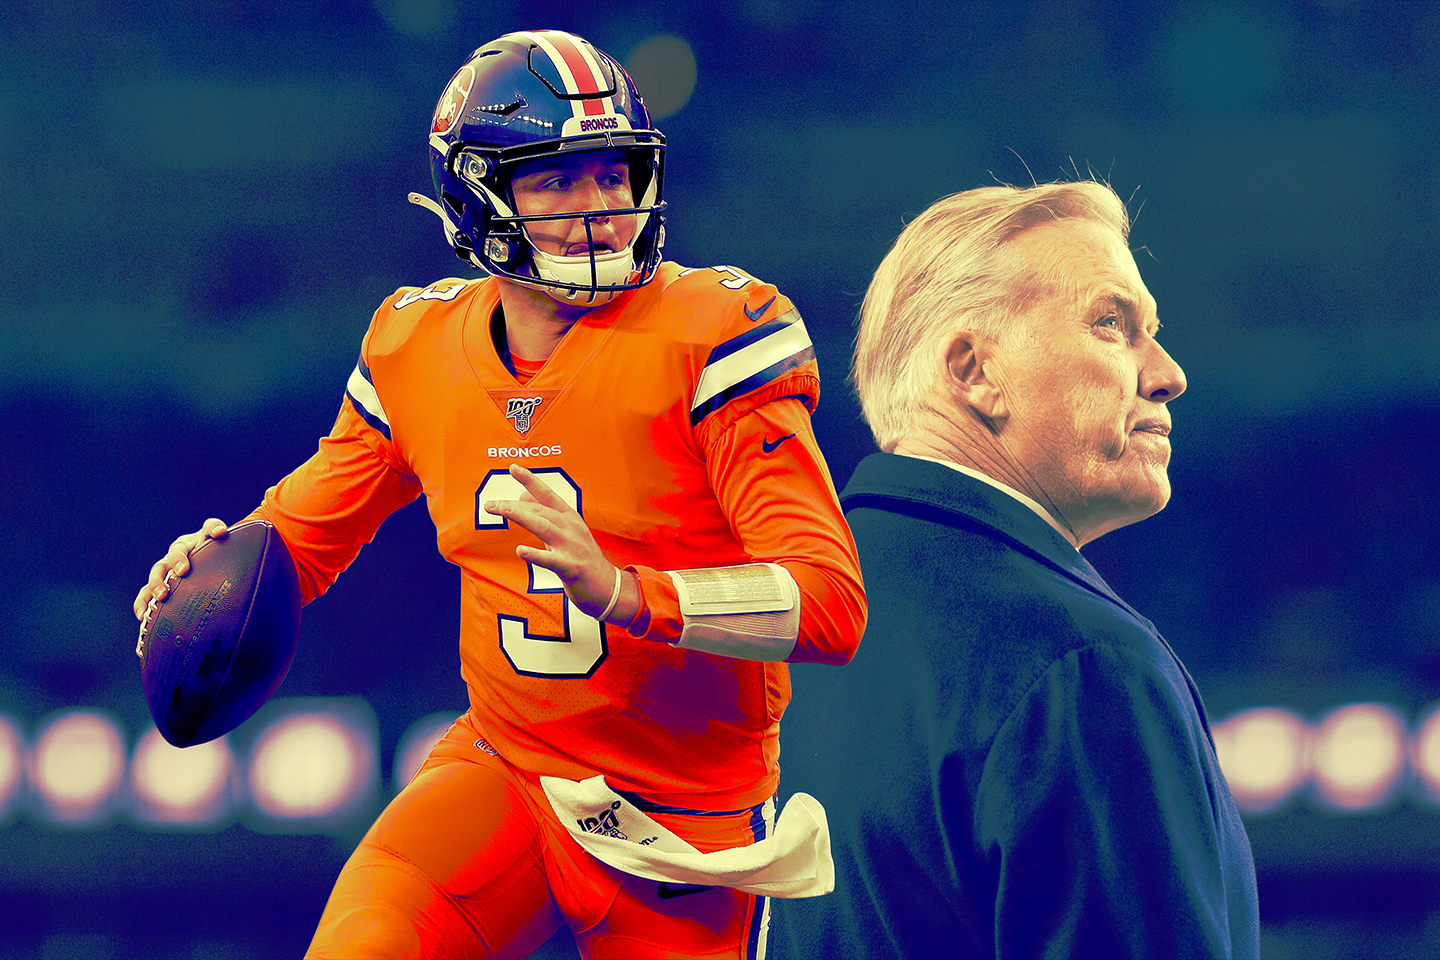 Broncos News: John Elway Was 'Phased Out' Of Franchise, Per Report